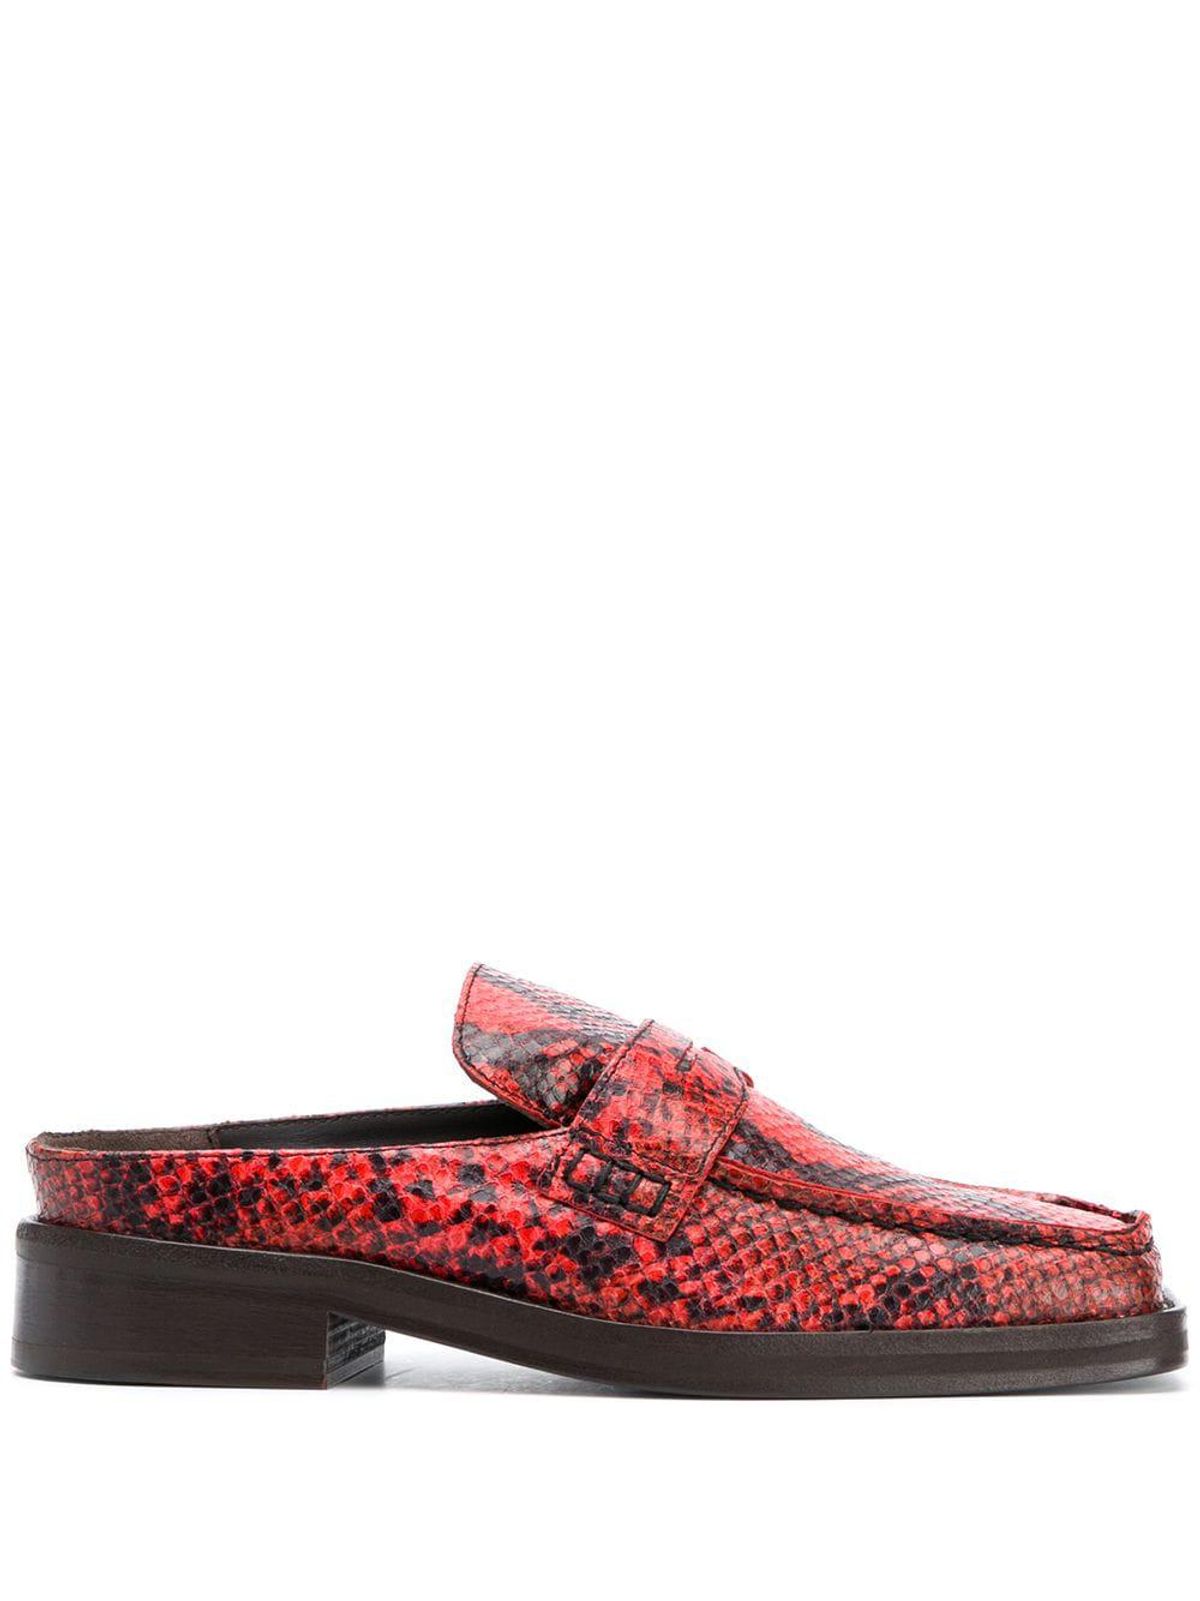 martine rose arches snakeskin print mules